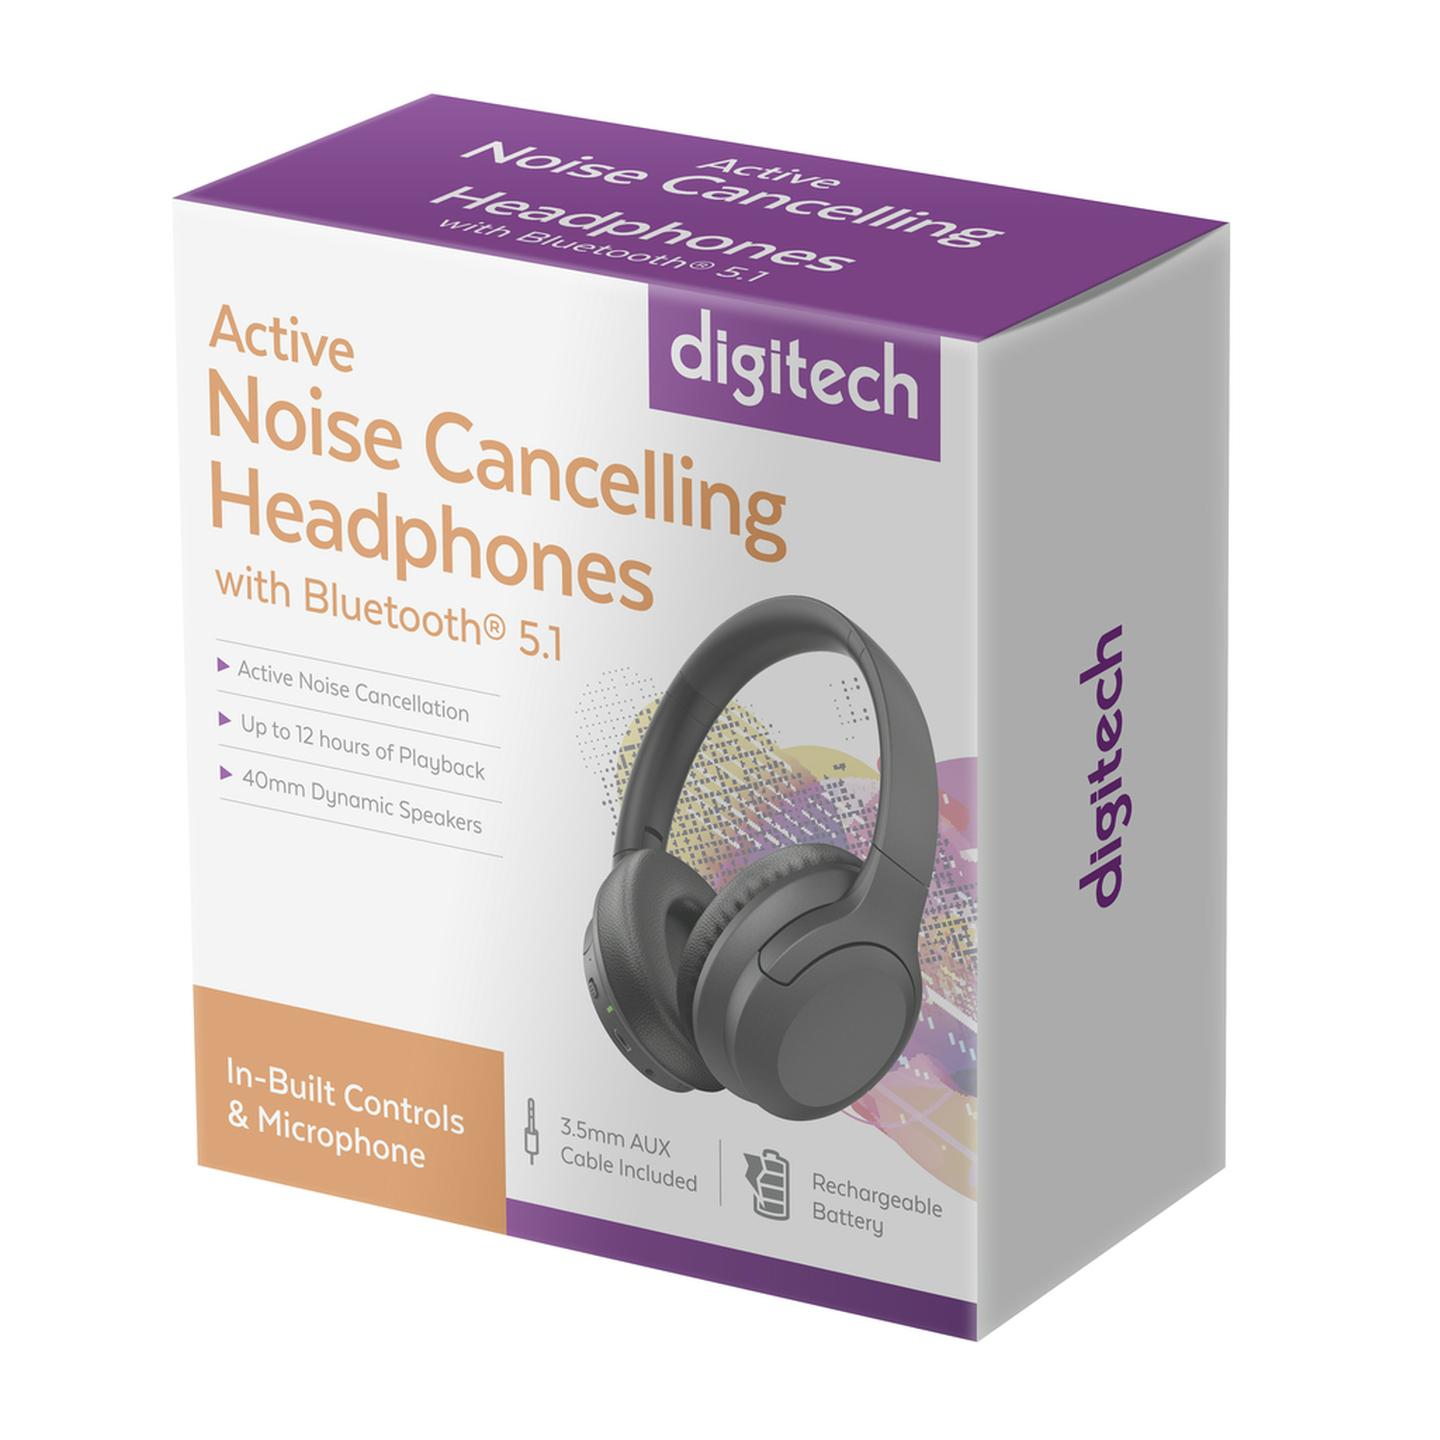 Digitech Active Noise Cancelling Headphones with Bluetooth